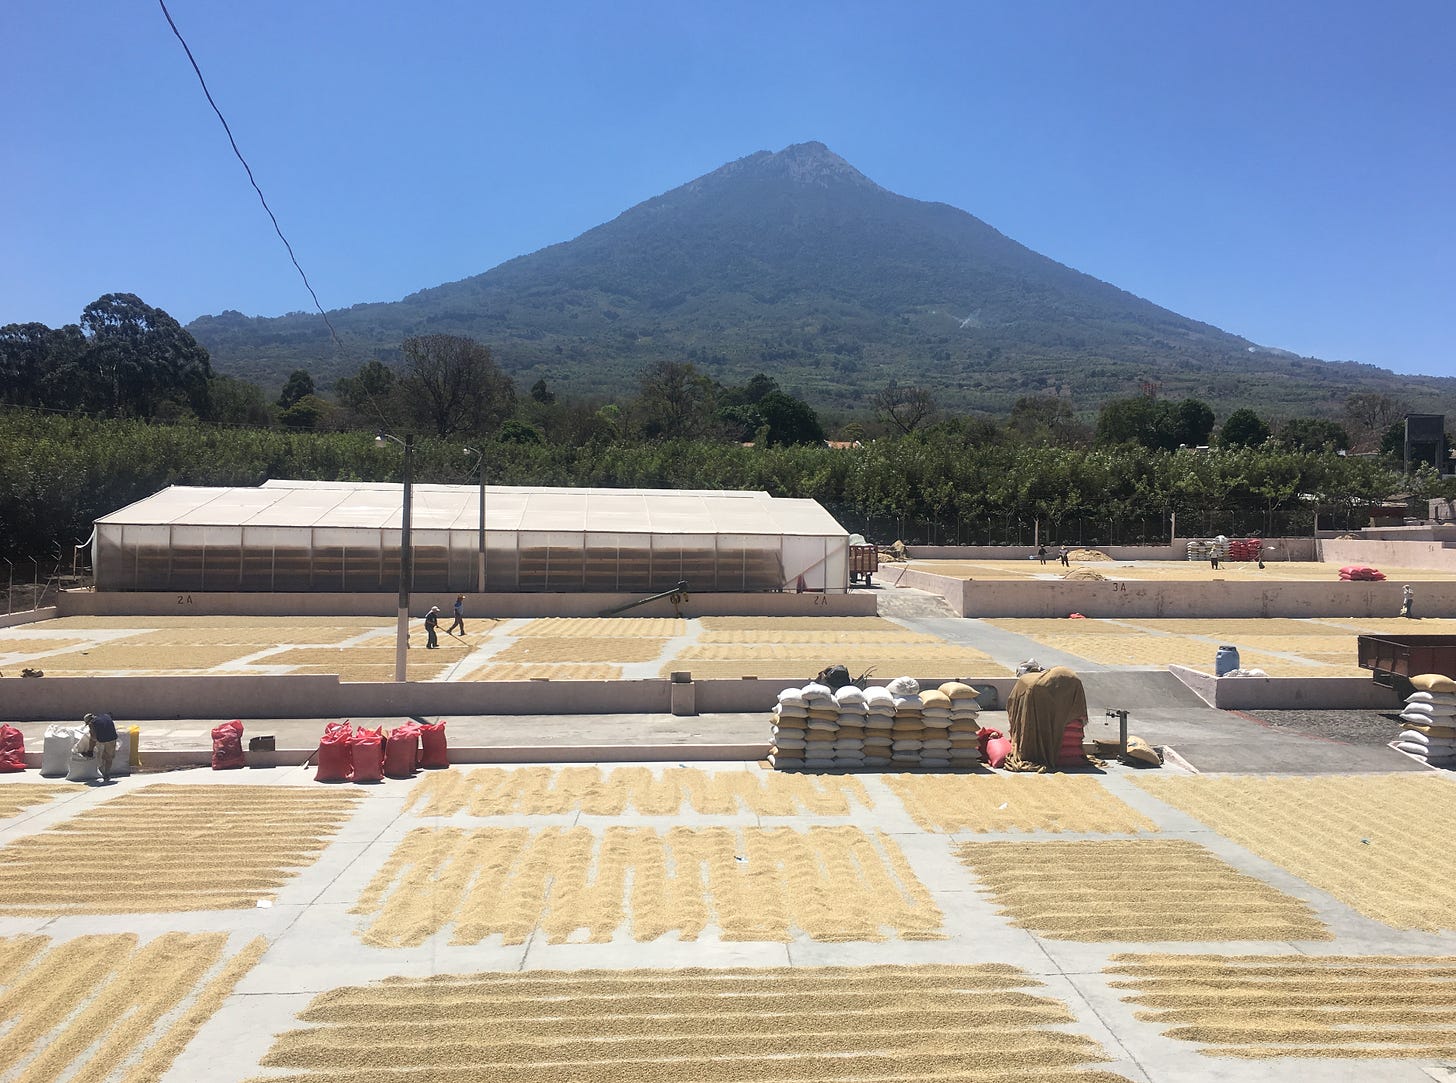 Coffee cherries dry in rows on concrete pads in the foreground. A mountain rises up into a clear blue sky in the background.